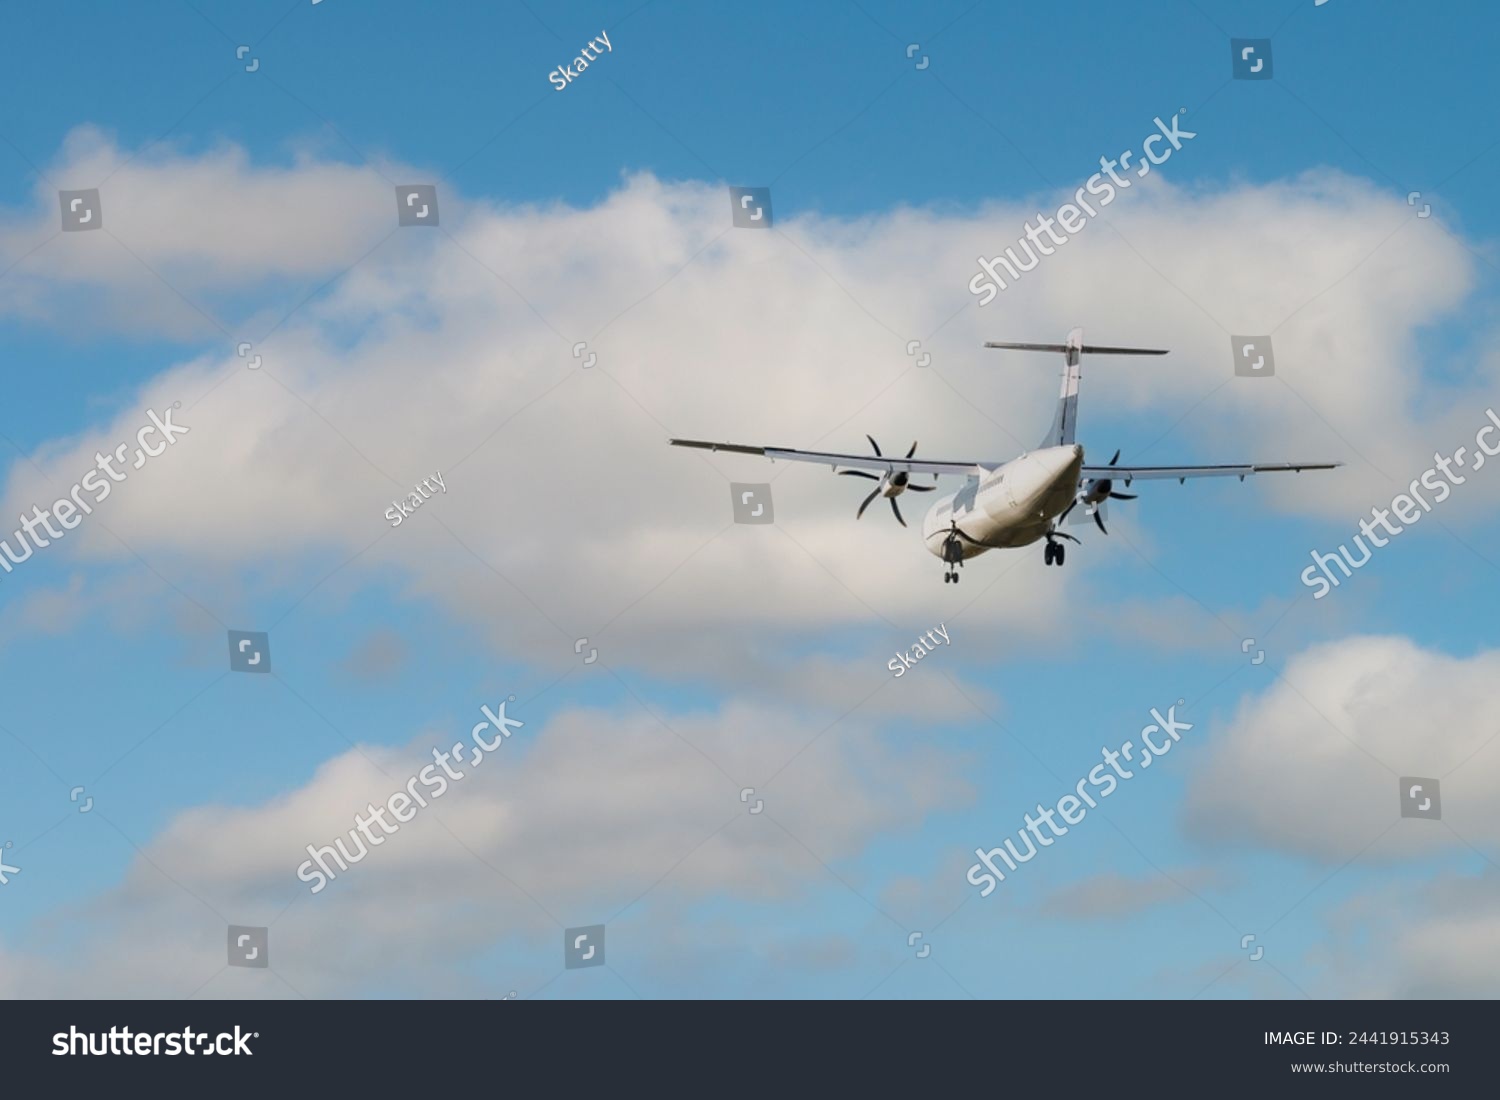 Rear view of an ATR 72 airplane among the clouds. Twin-engine turboprop short-haul regional passenger aircraft. Landing airplane. #2441915343